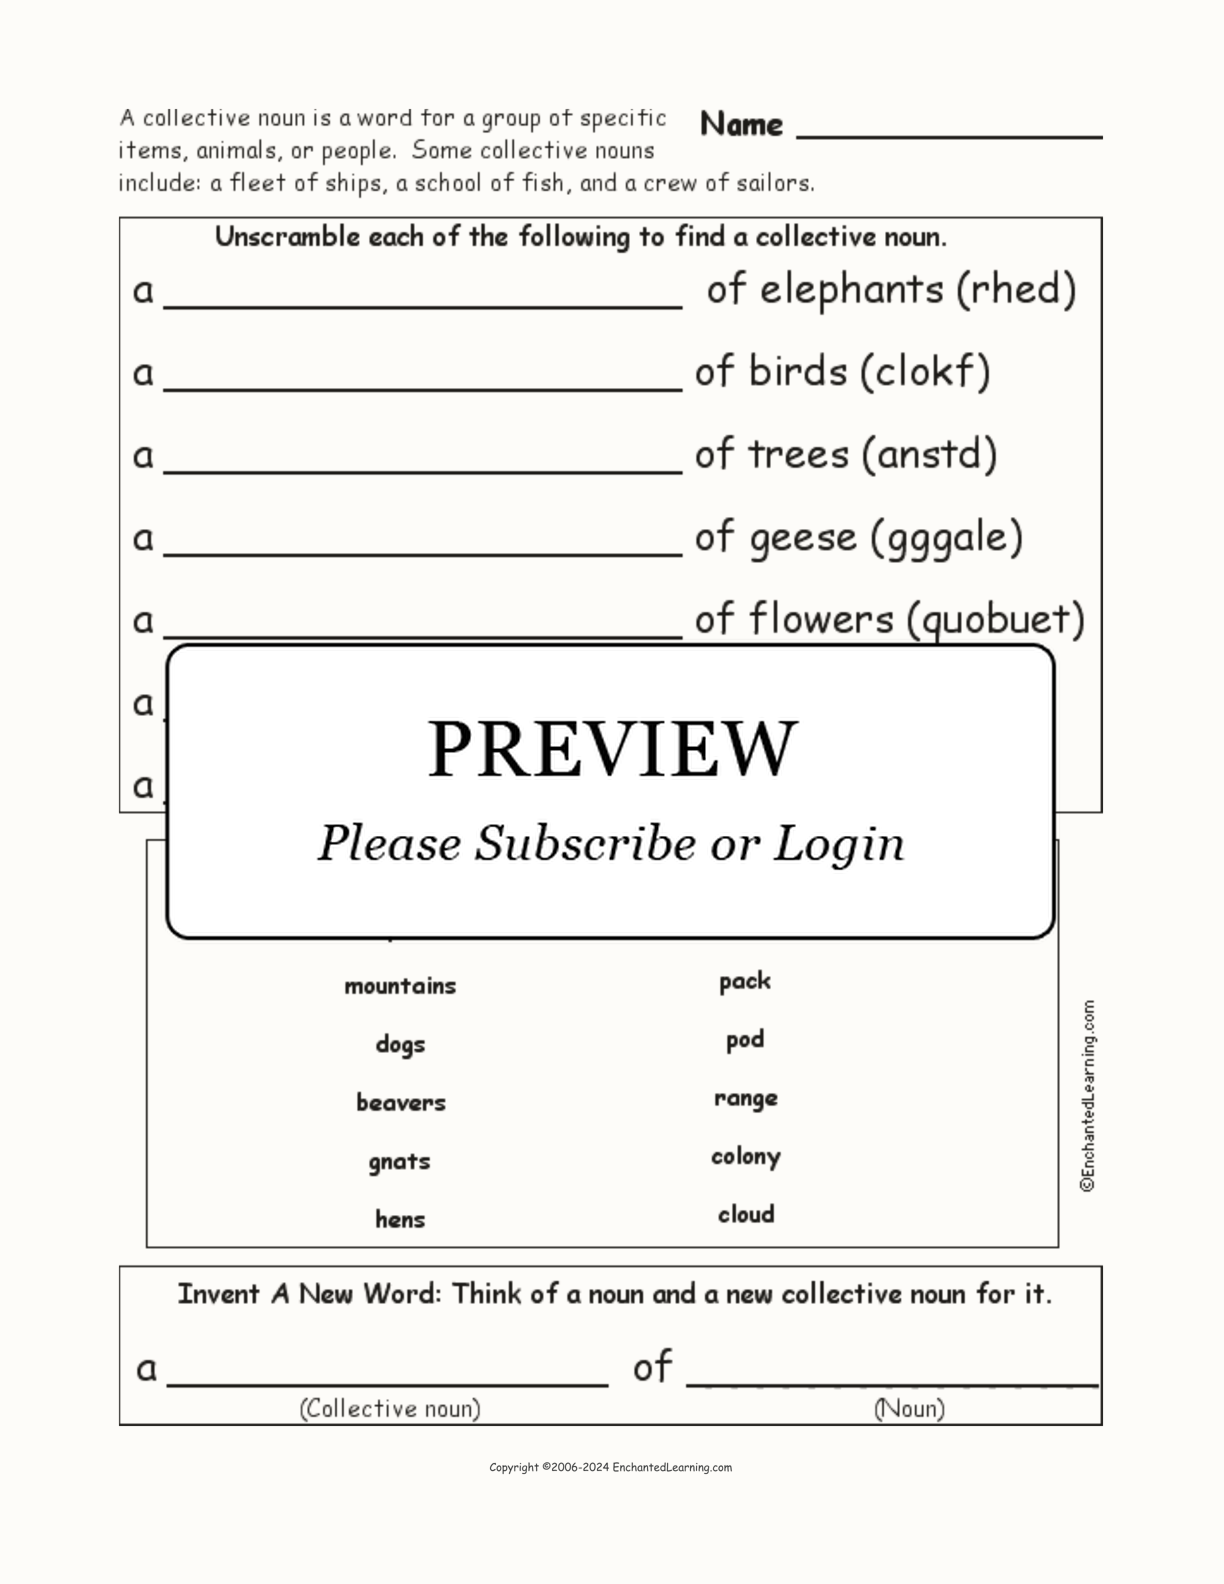 find-the-collective-noun-worksheet-for-1st-3rd-grade-lesson-planet